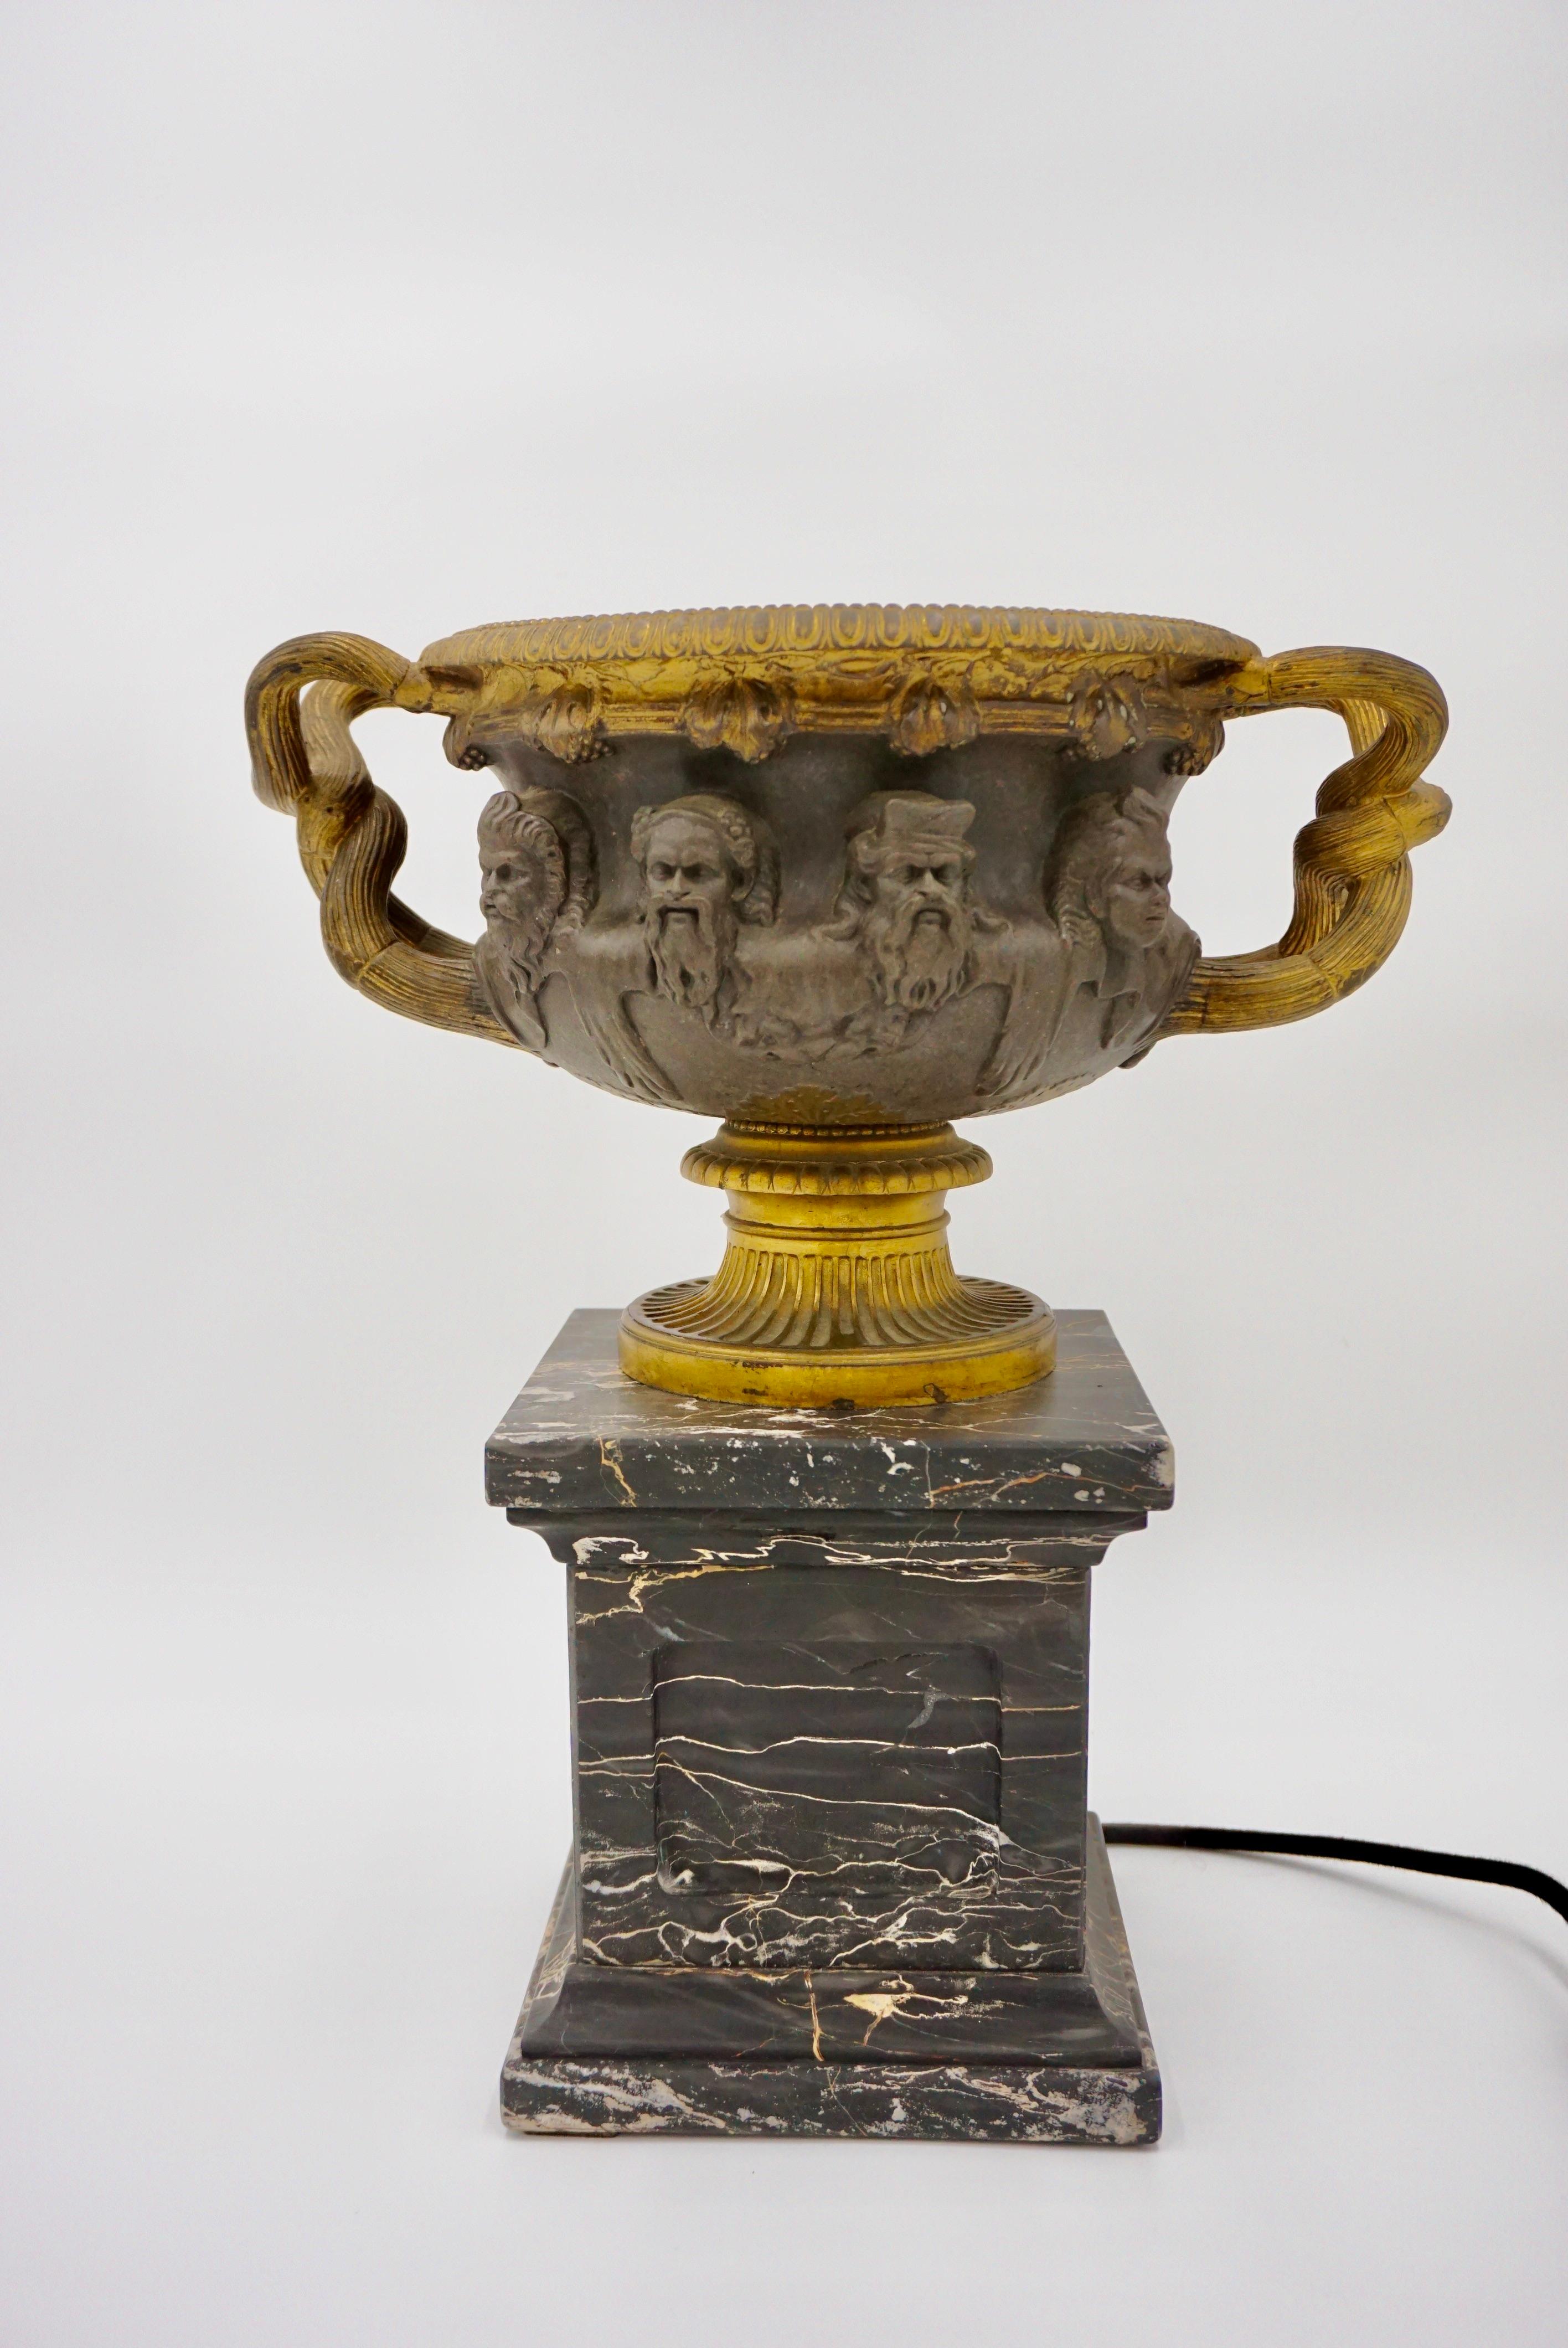 Large gilted bronze 'Warwick' vase lamp by Barbedienne, Paris circa 1860 mounted on a portoro marble pedestal.
fine and original patina 
led lamp 4w 230V
measures: 35 X 23 cm, Height: 39cm; the vase: 35 x 23cm height: 20cm; the pedestal marble:17